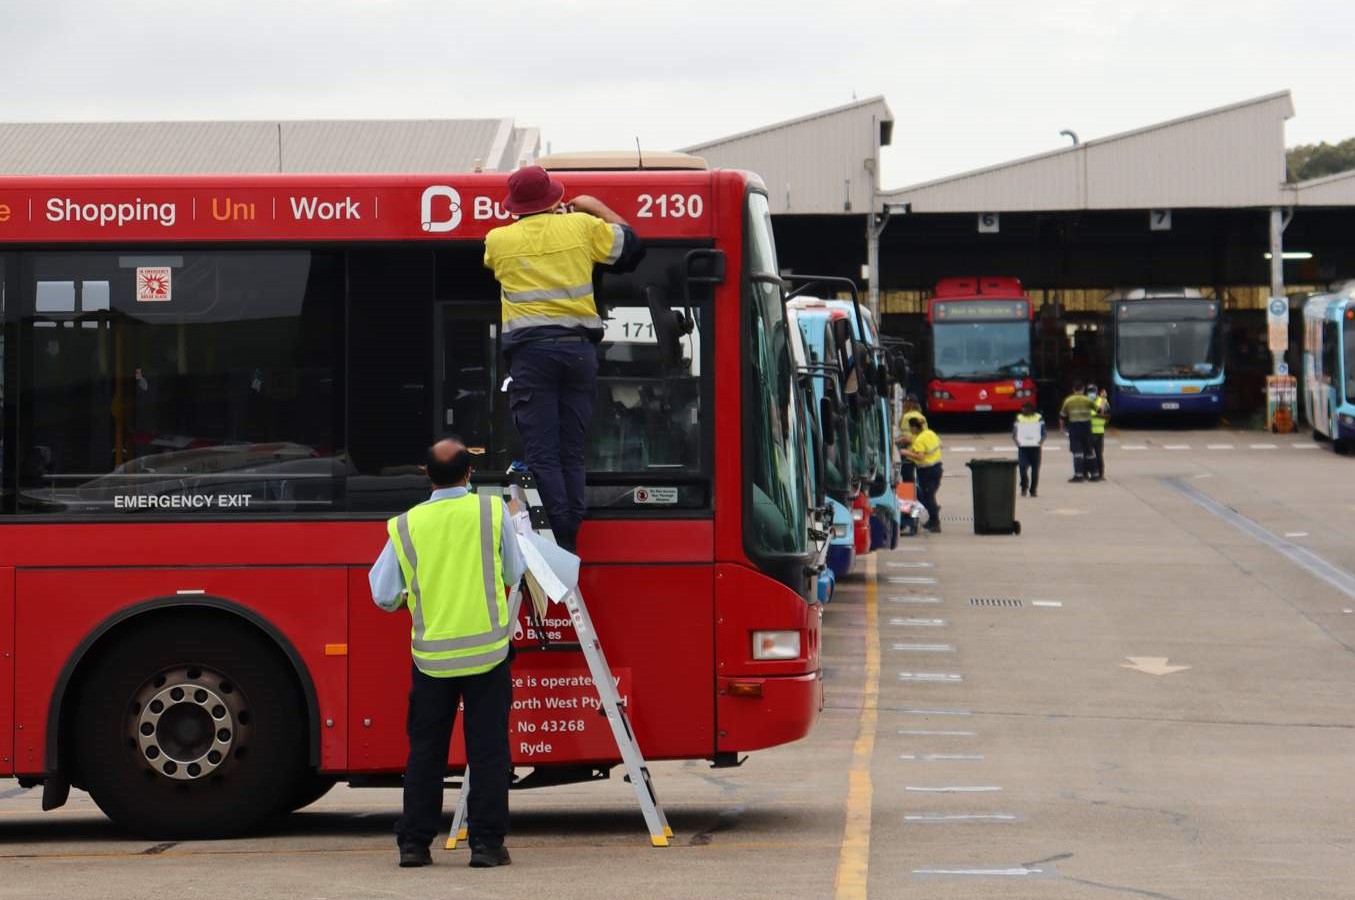 453 buses receiving their new logos at Ryde and Willoughby depots on Day 1 of operations